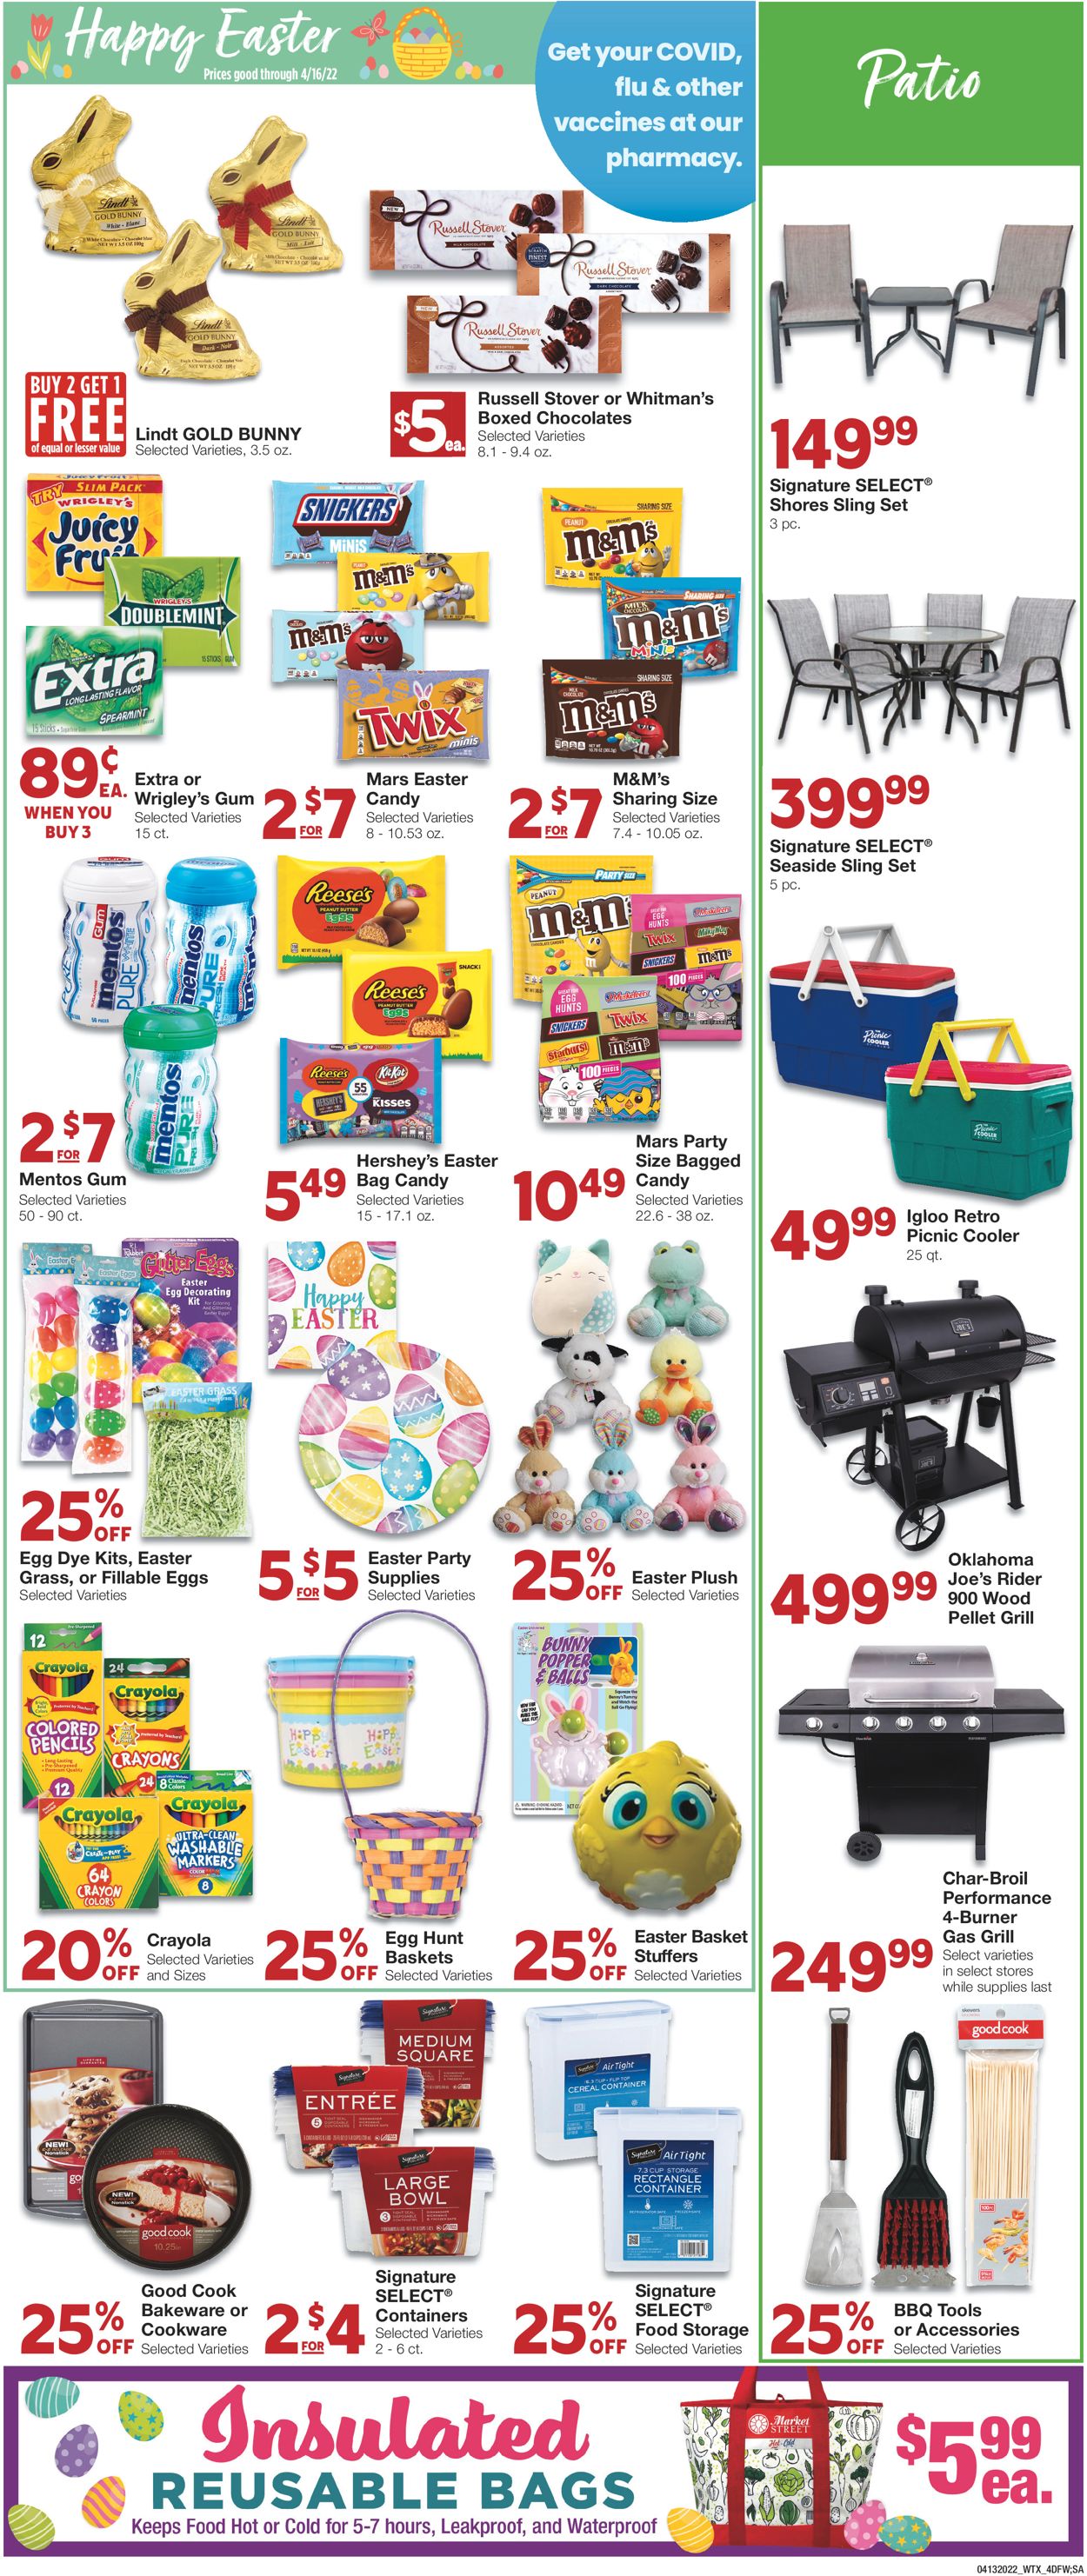 United Supermarkets EASTER AD 2022 Weekly Ad Circular - valid 04/13-04/19/2022 (Page 4)